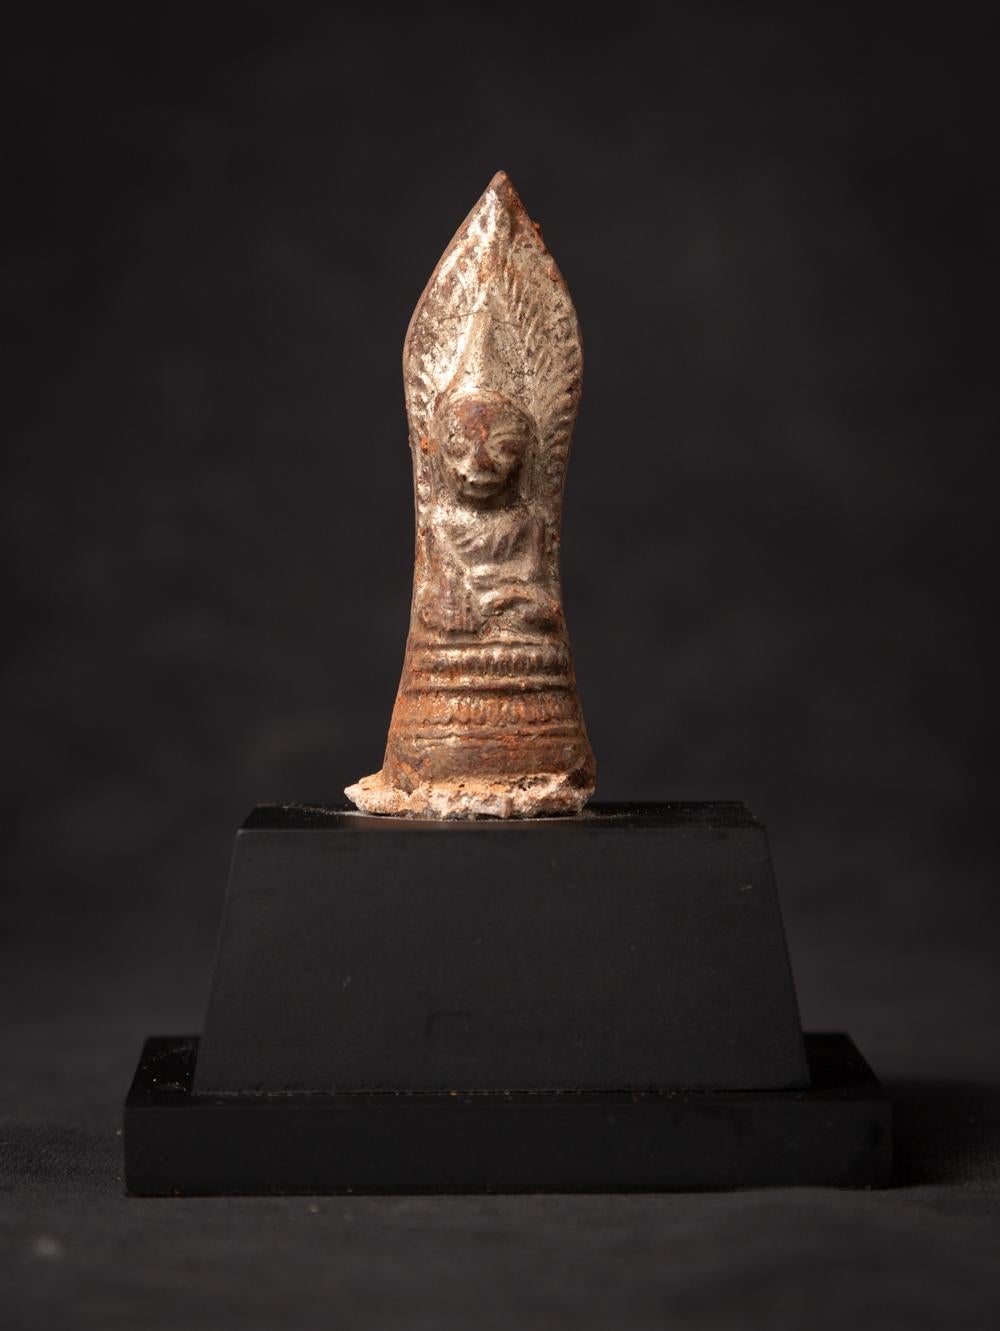 Material: Terracotta
12,2 cm high
The base is 9,2 cm wide and 7,2 cm deep
The amulet itself (without the base) is 7,8 cm high
Shan (Tai Yai) style
Bhumisparsha mudra
19th century
Weight: 165 grams
Originating from Burma
Nr: AML-06